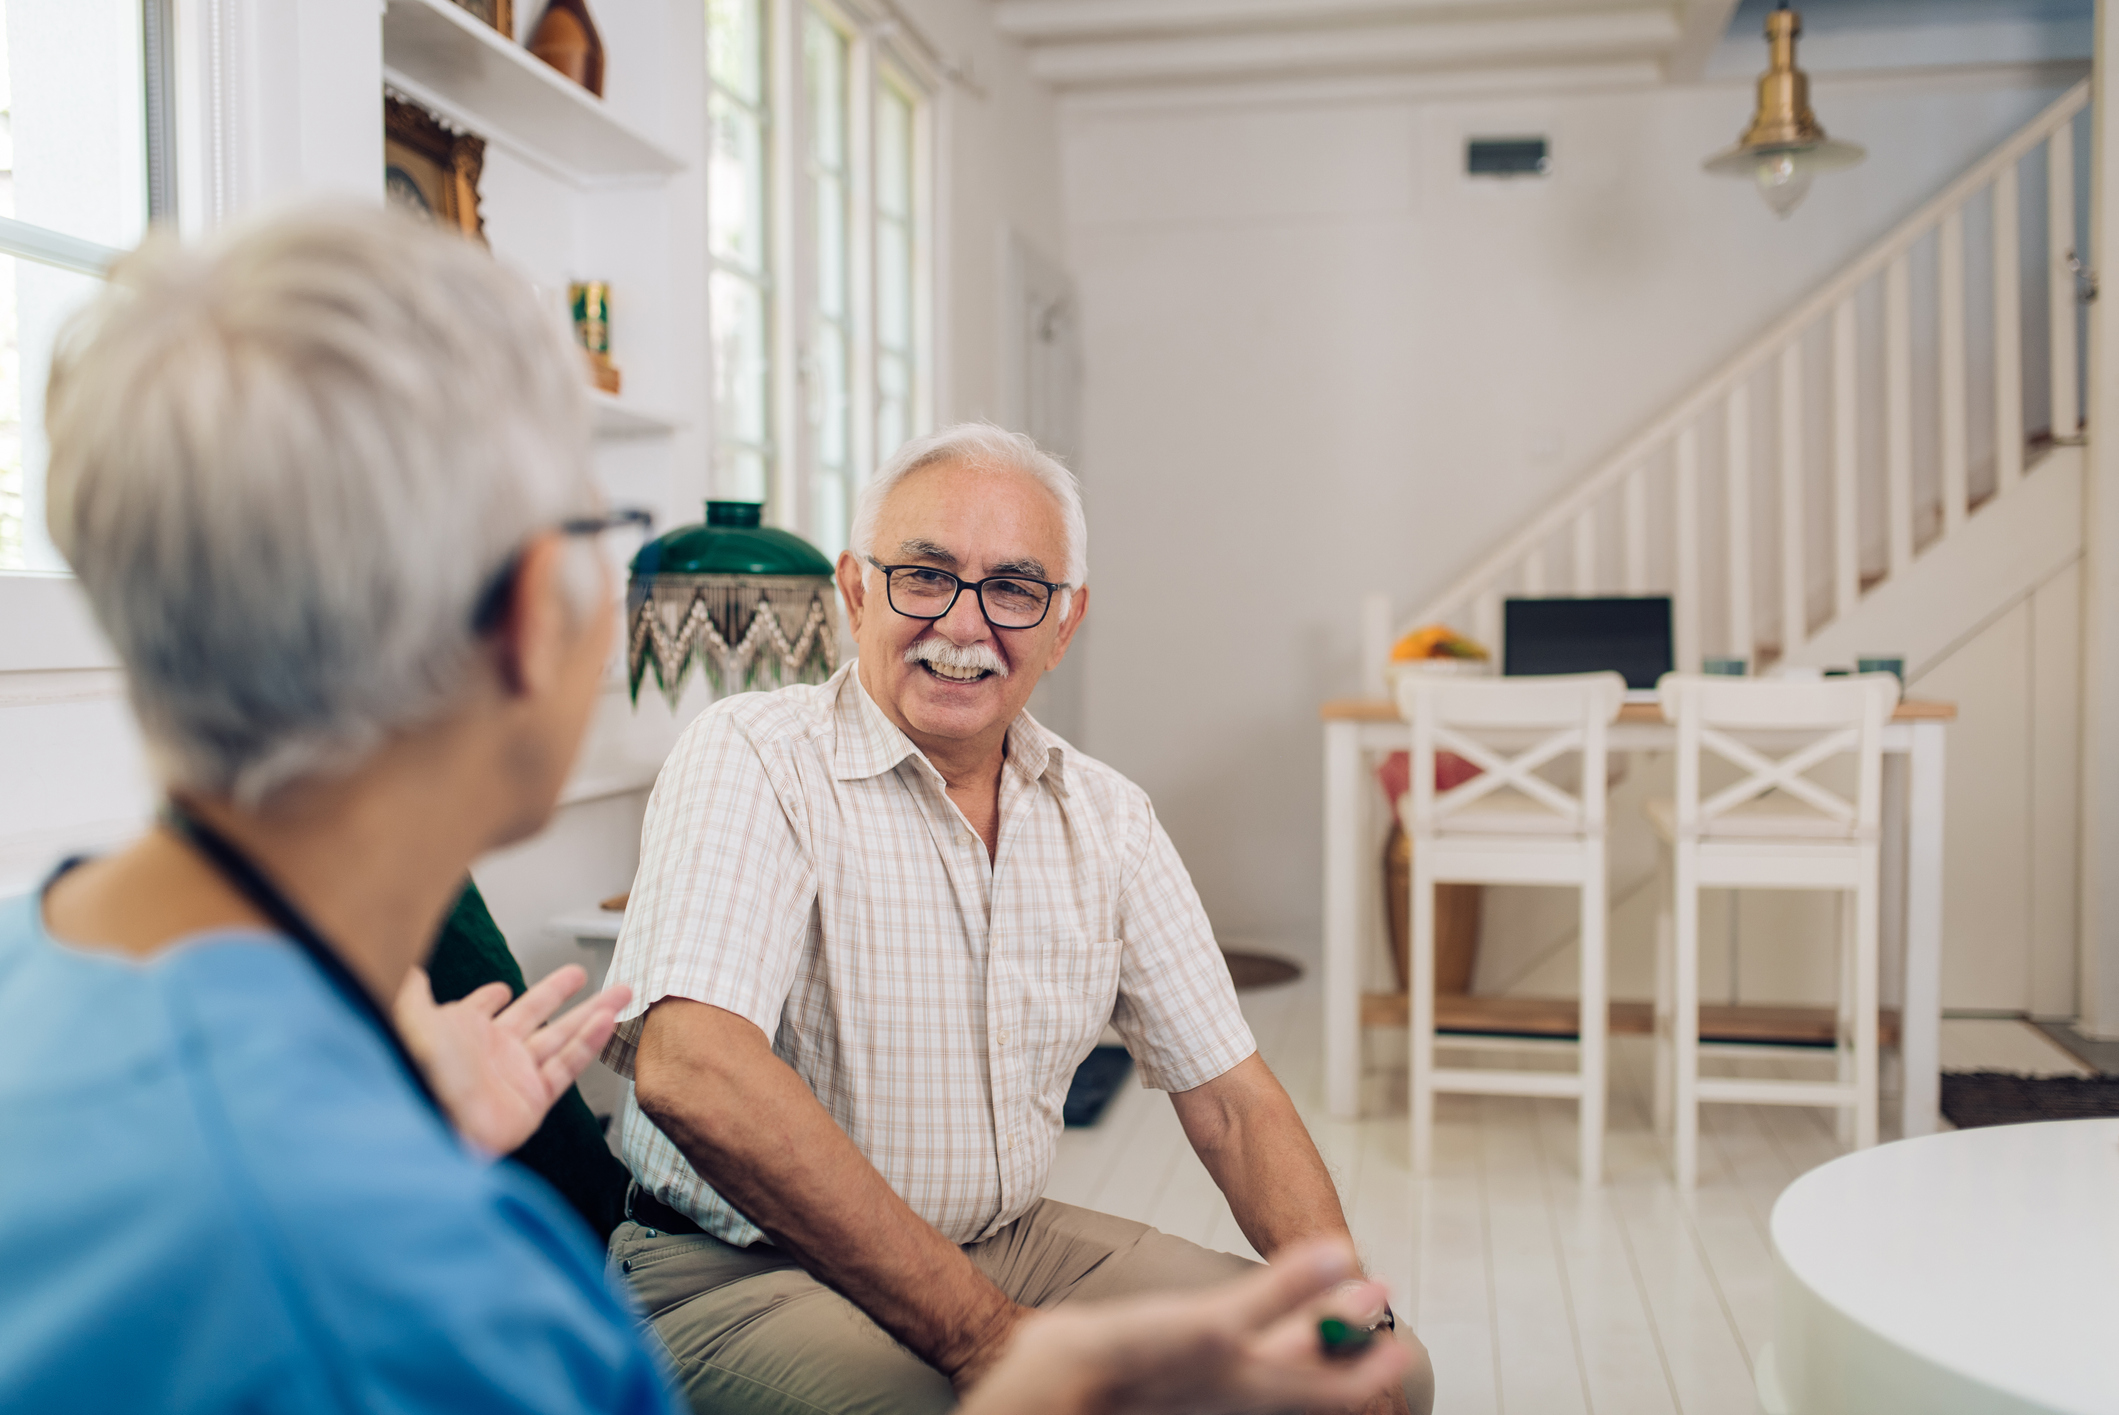 An in-home care consultation with the experts in senior care in Urbandale, IA helps families learn about elder care options.